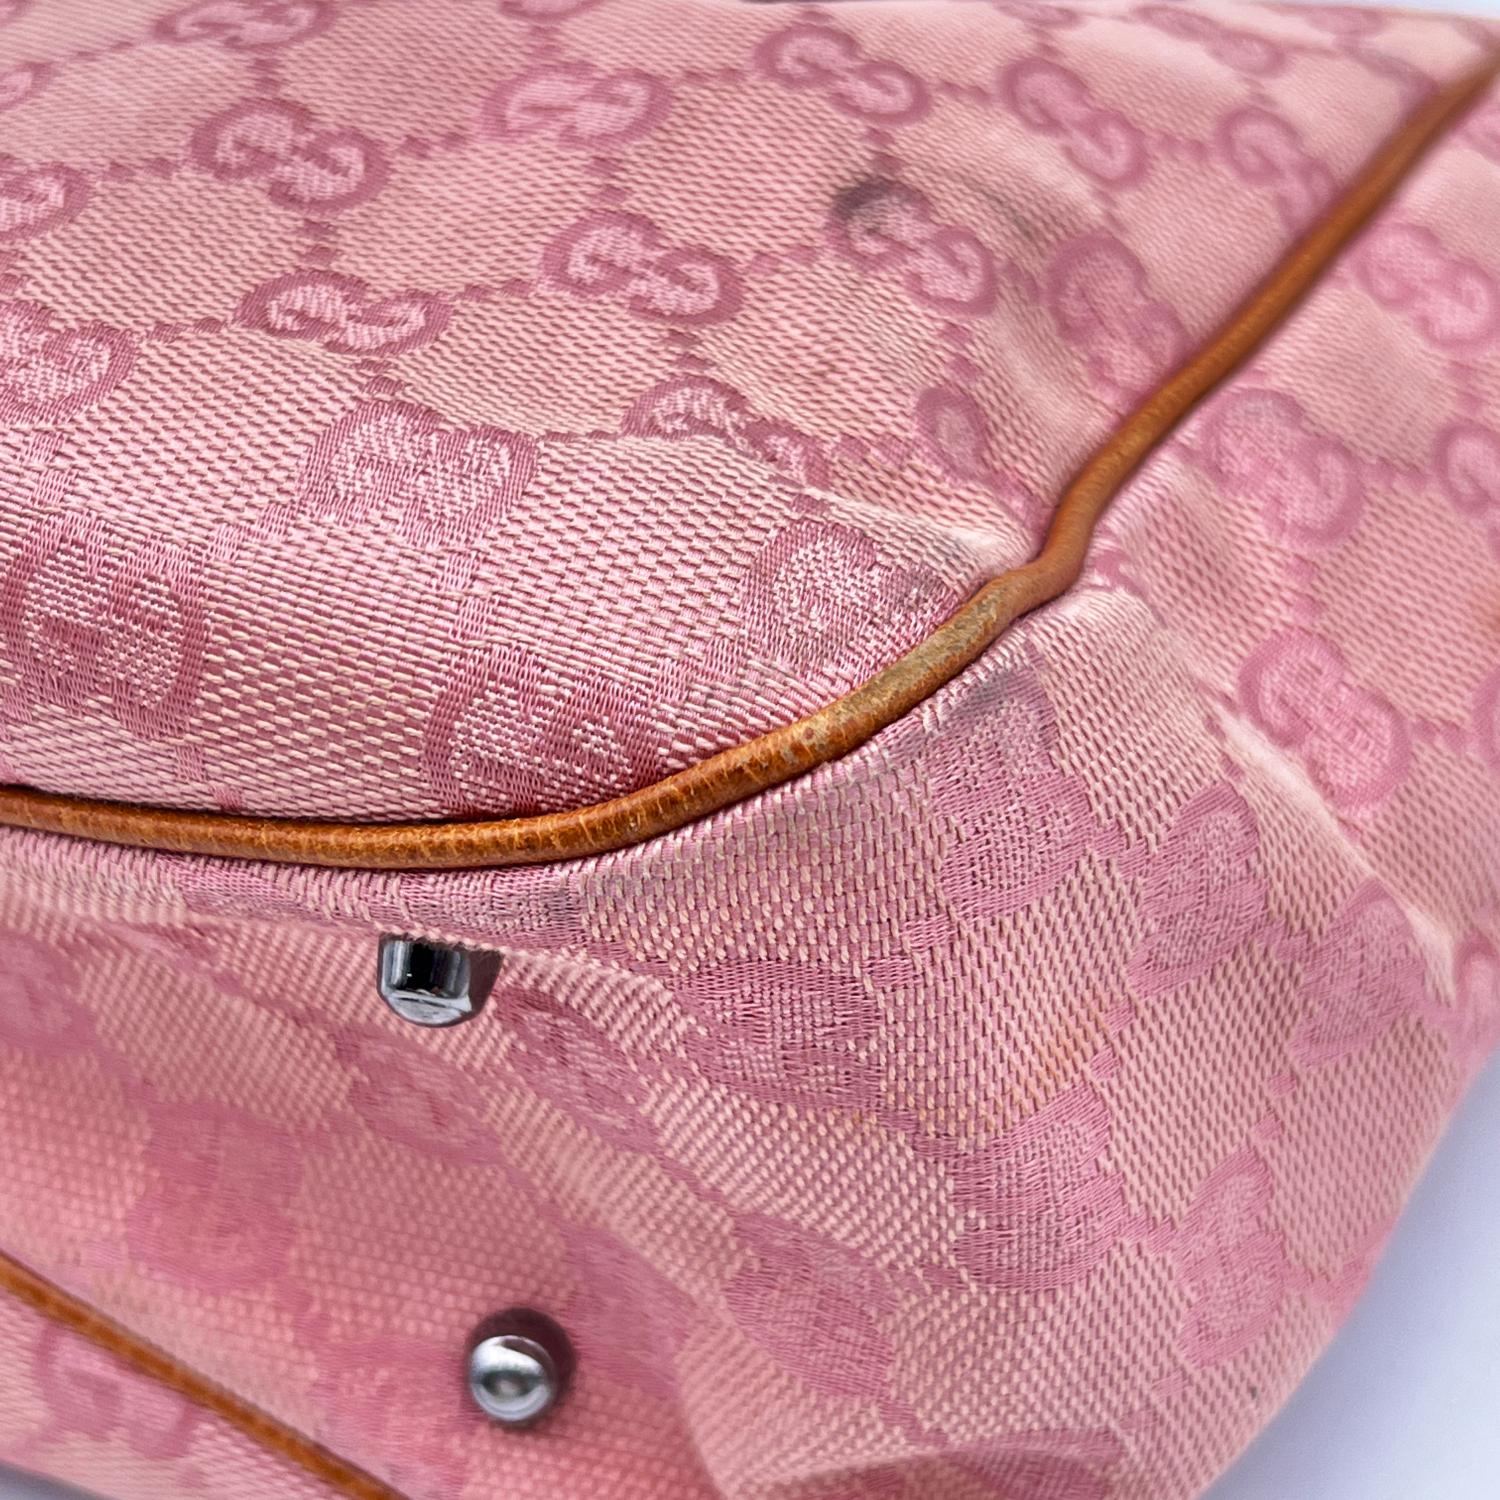 Gucci tote crafted in pink monogram canvas with beige genuine leather trim and handles. Open top. Inside, brown fabric lining. 1 side zip pocket inside. 'GUCCI - made in italy' tag inside (with serial number on its reverse).

Details

MATERIAL: